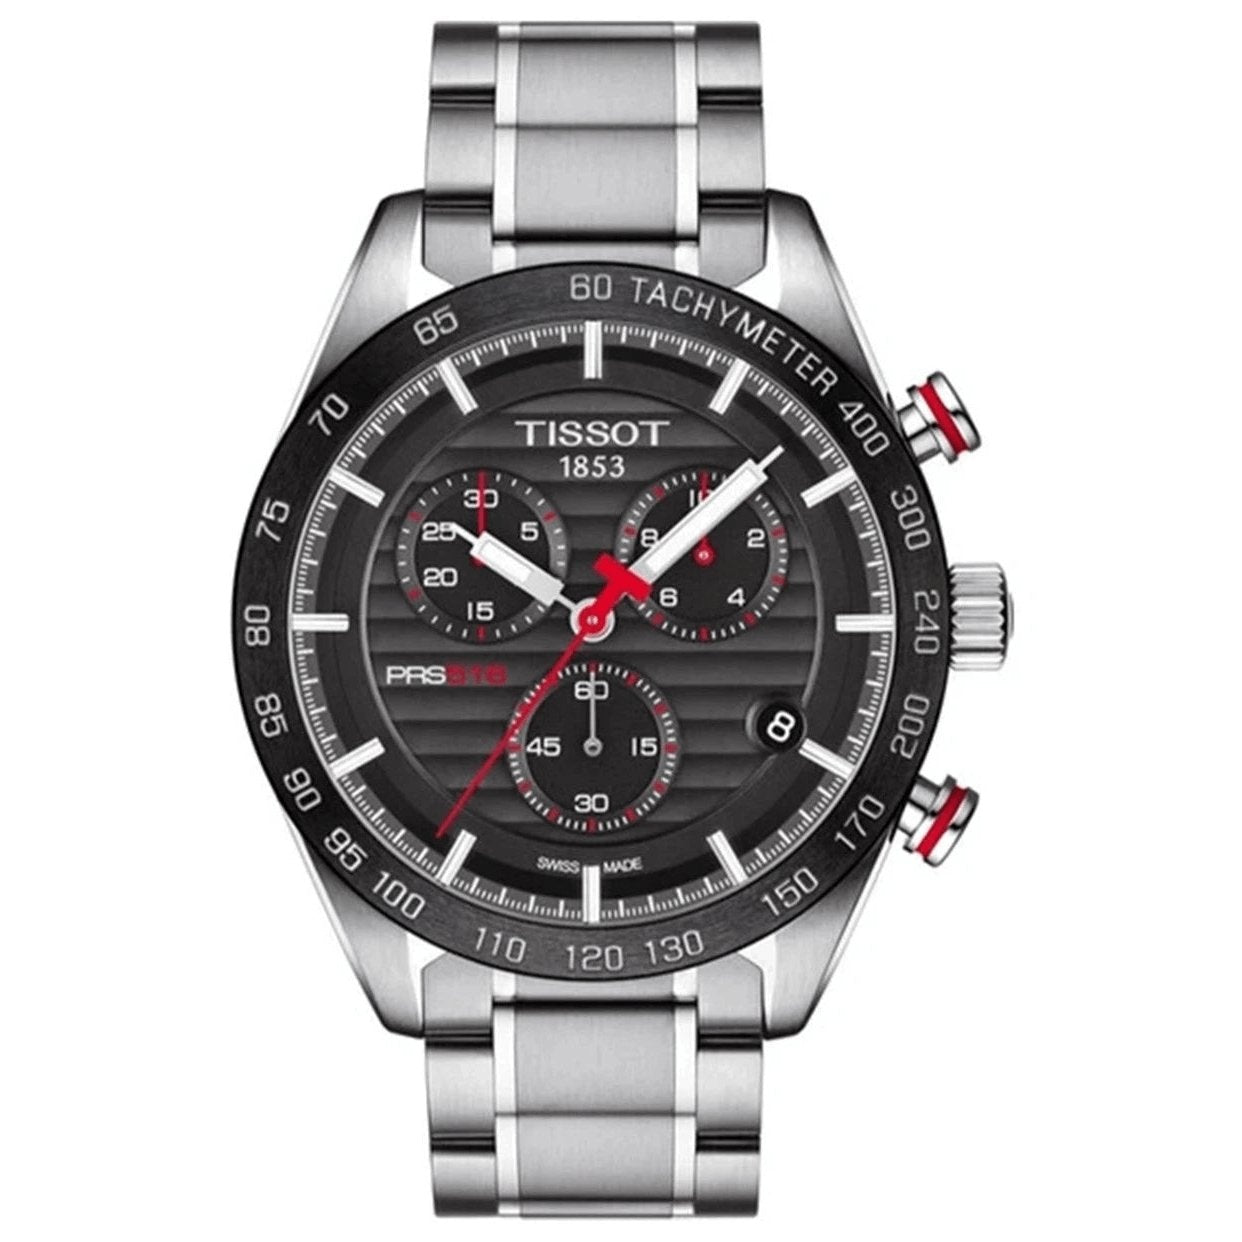 Tissot Men's Chronograph Watch PRS 516 Steel Red T1004171105101 - Watches & Crystals